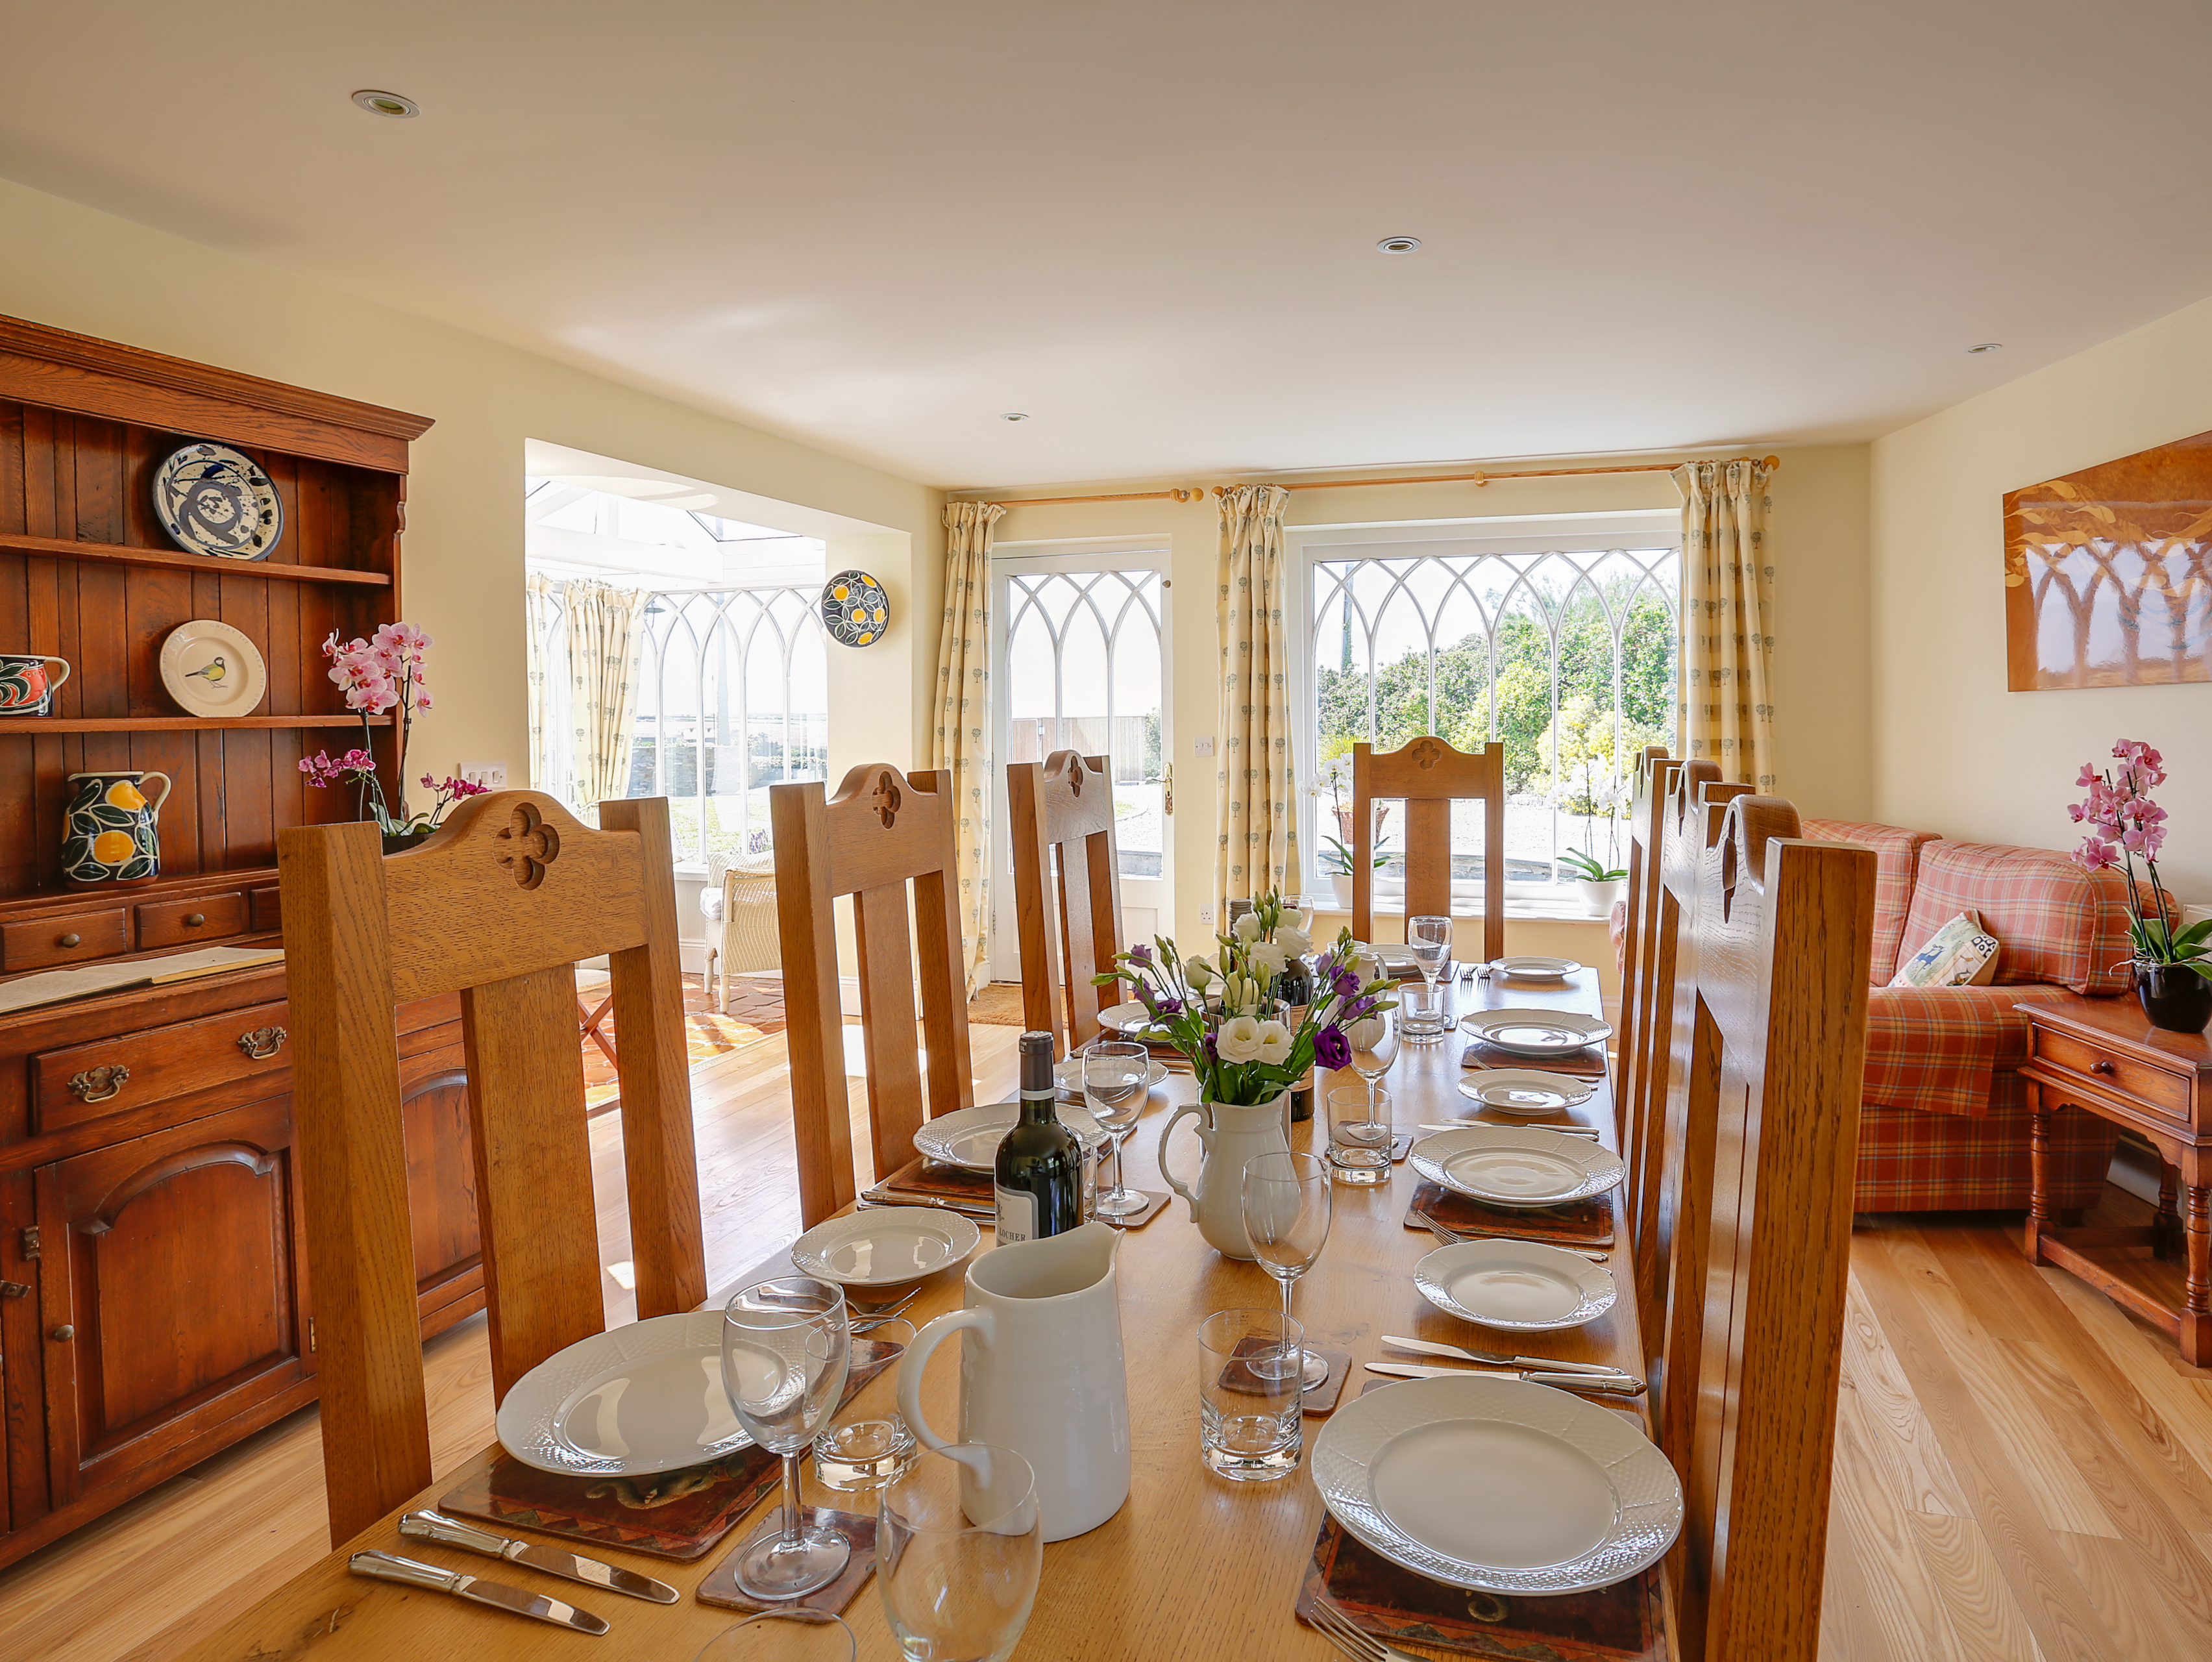 Spacious and light dining room with wooden floors dining table and chairs